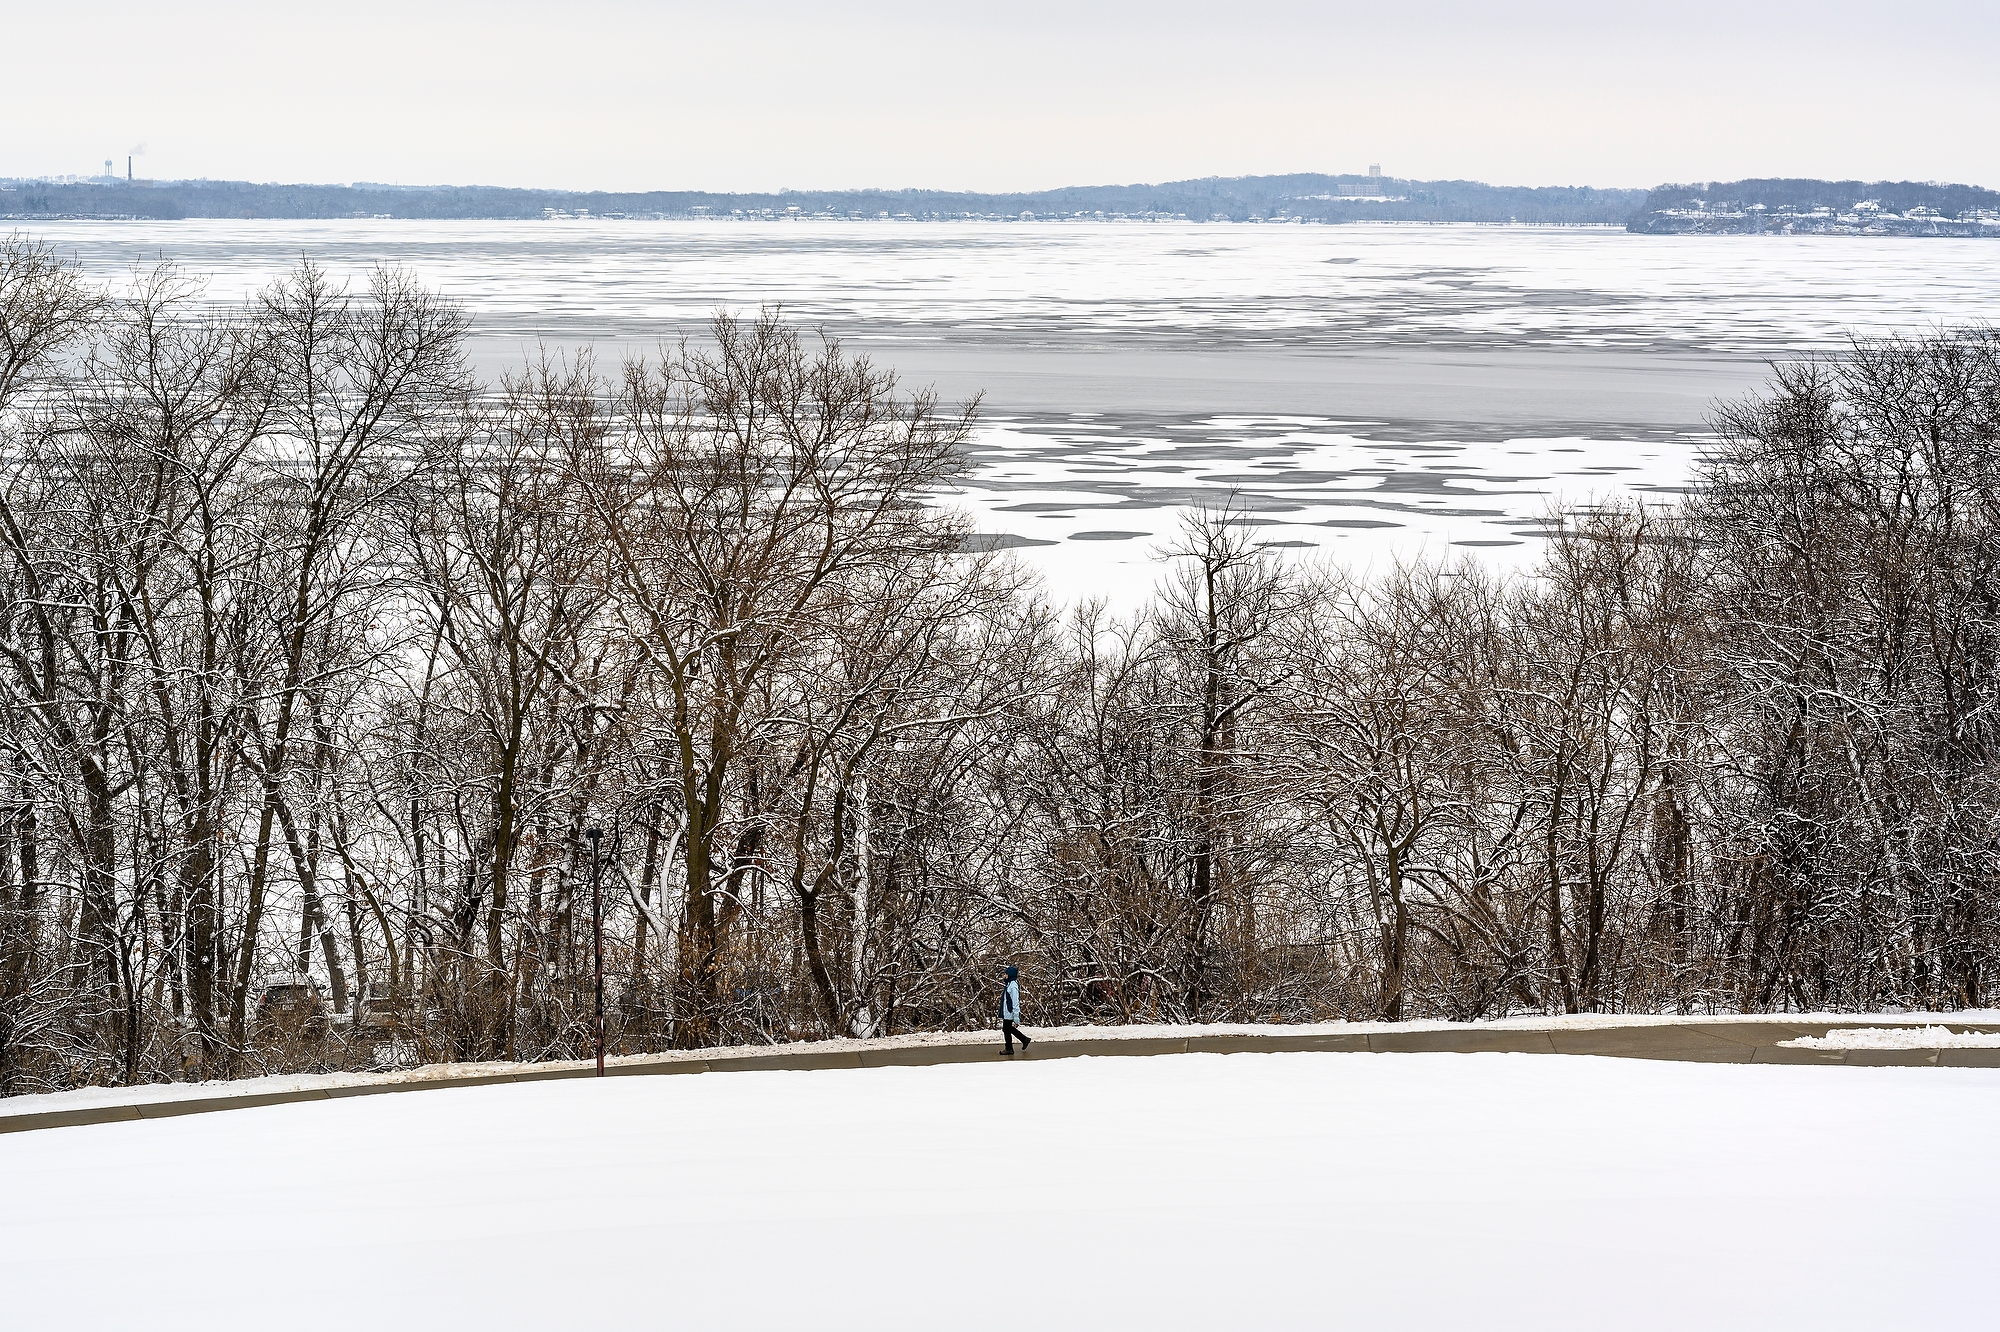 Madison lakes have thawed after historically short freezes